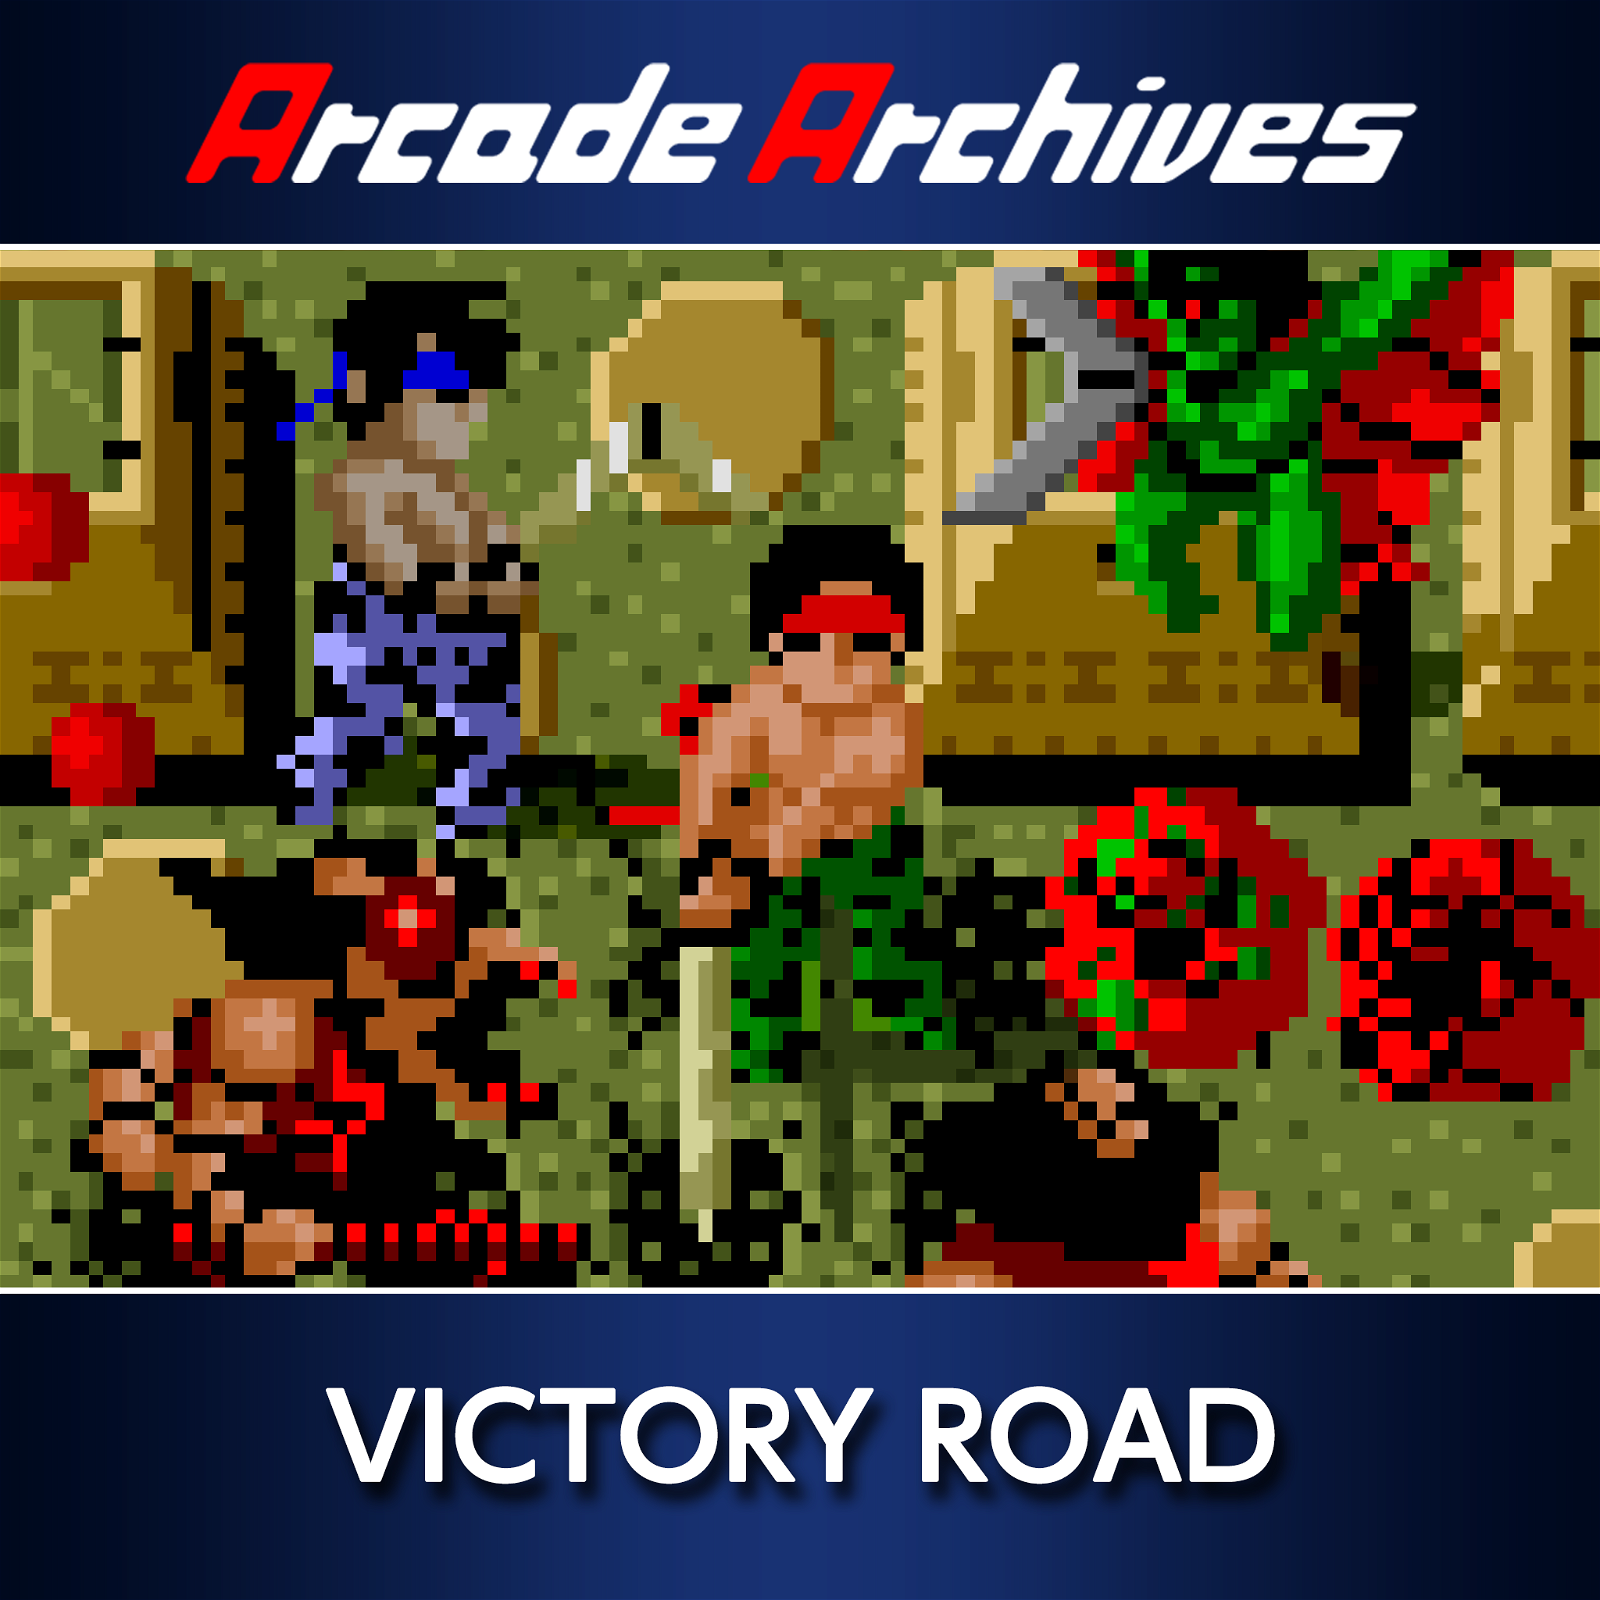 Image of Arcade Archives VICTORY ROAD